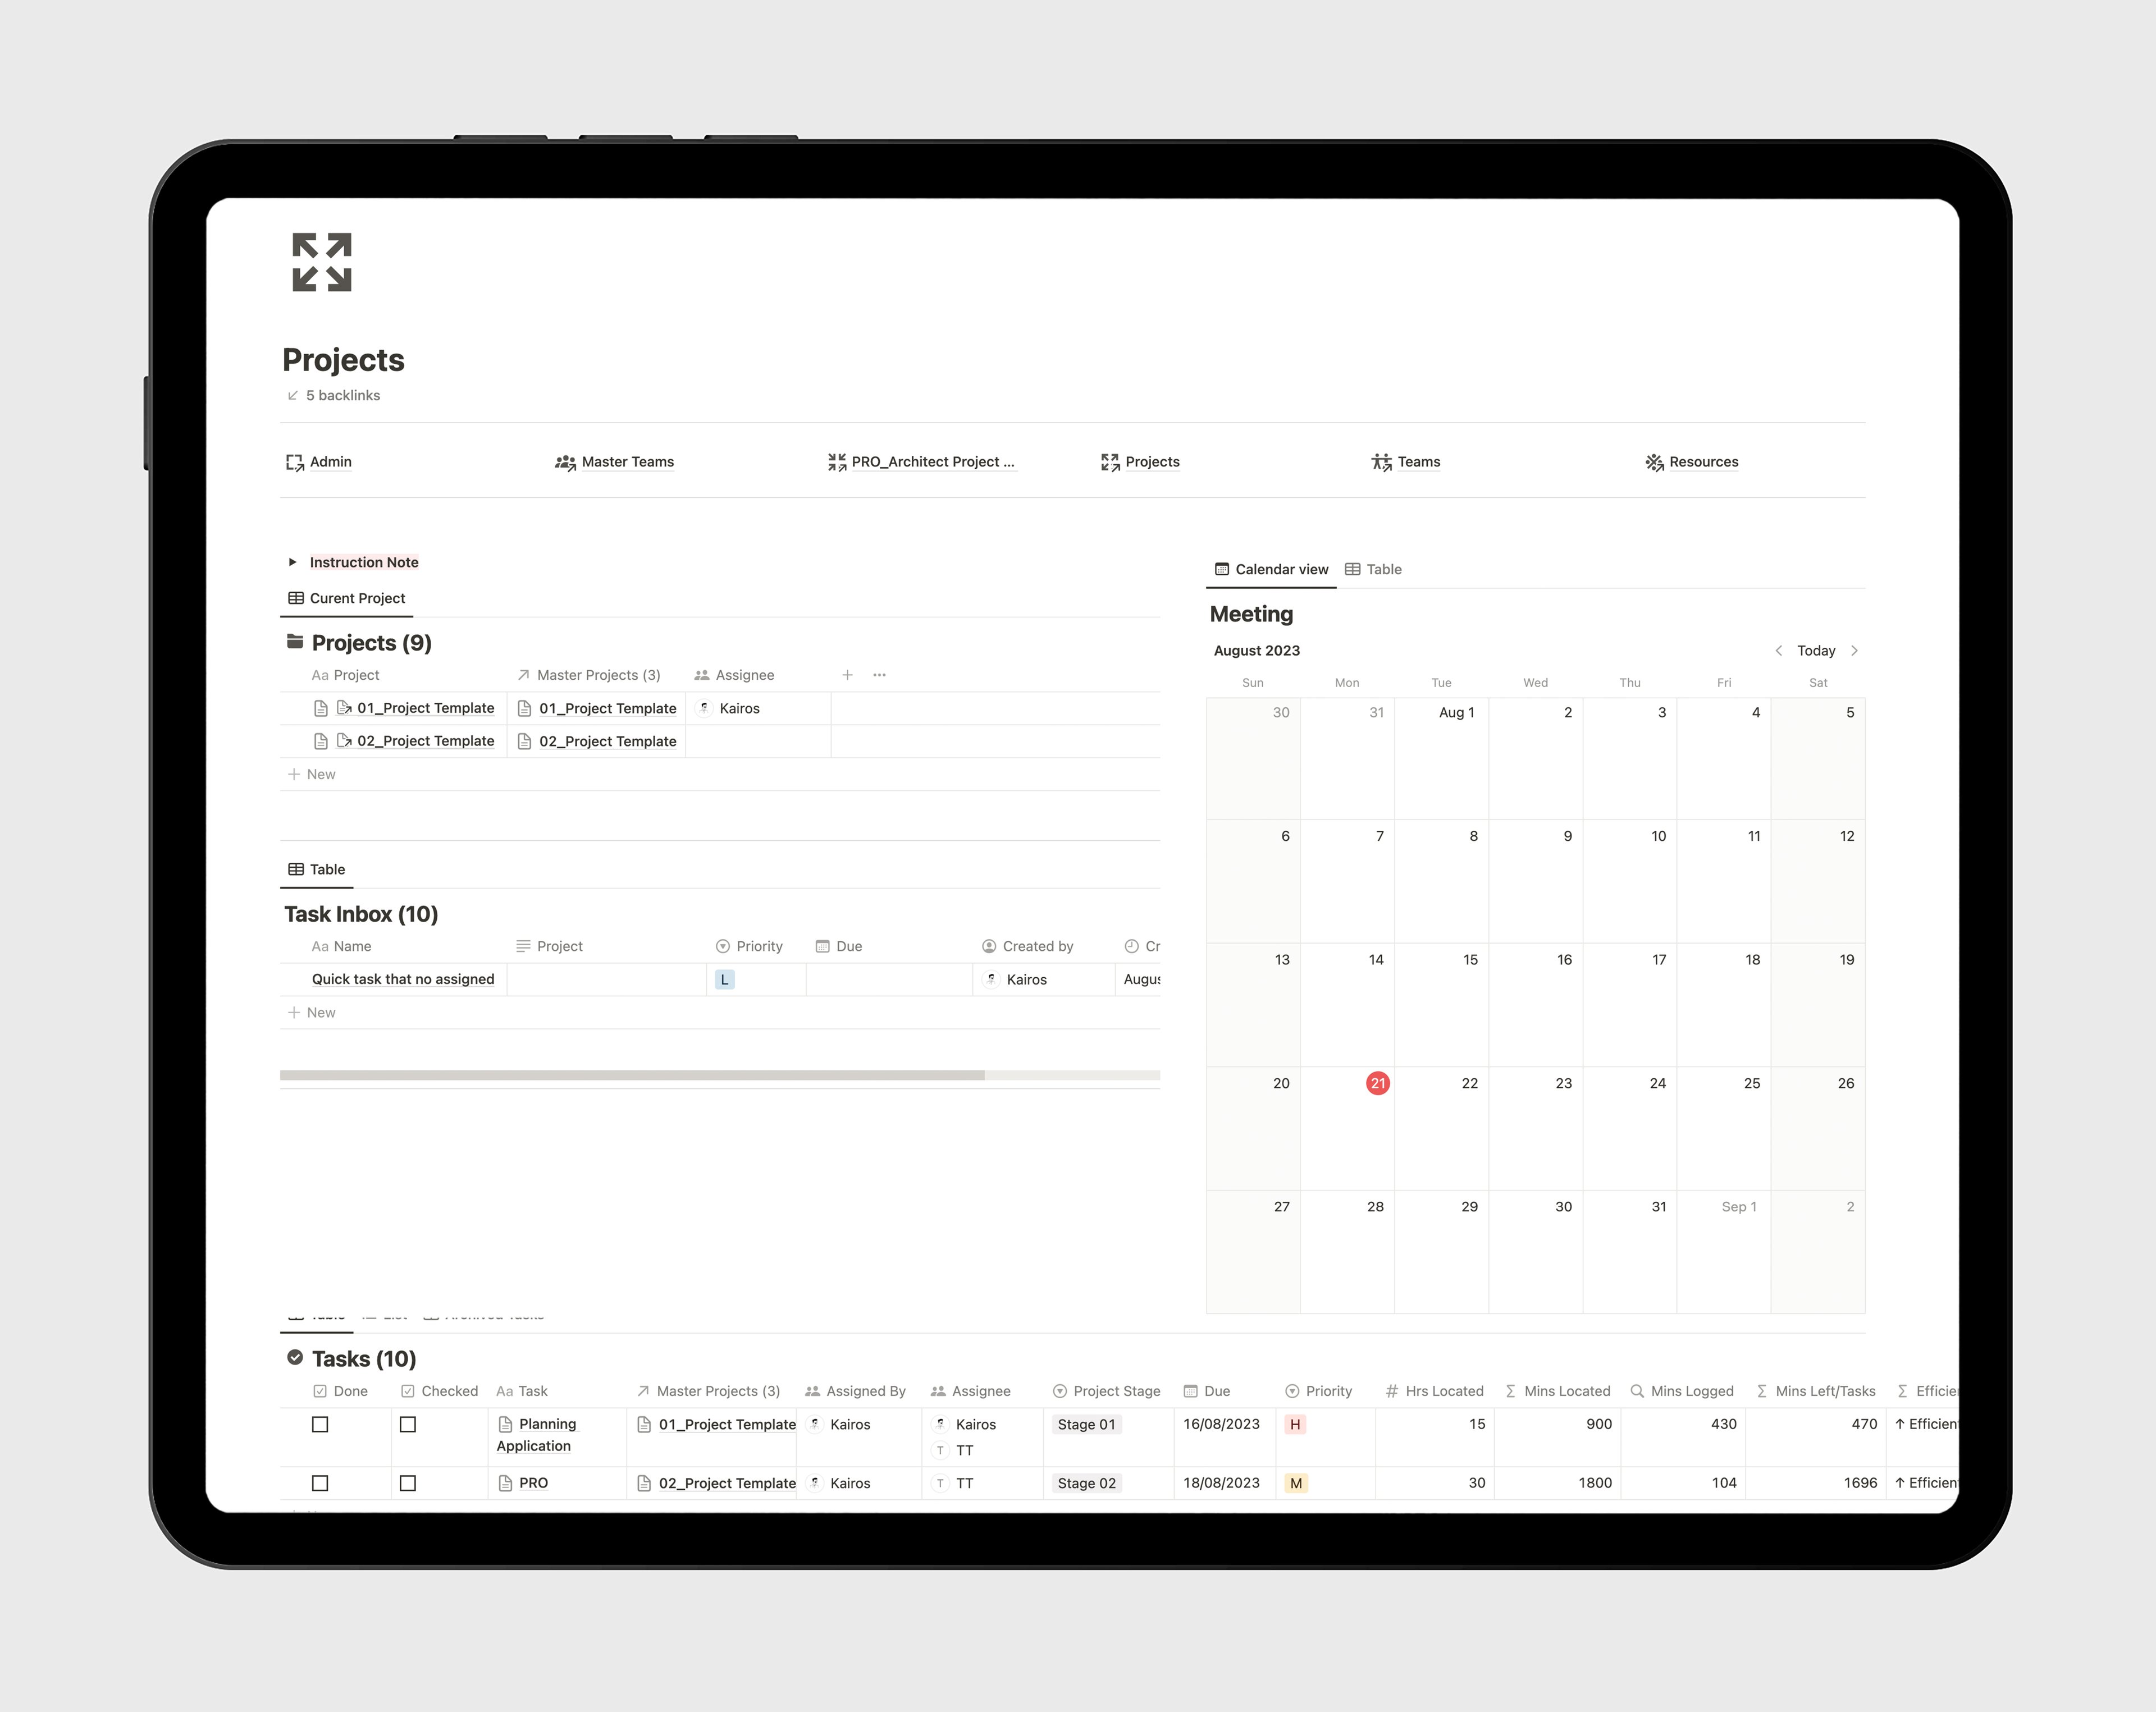 This PRO template offers in-depth project planning, encompassing logged hours categorised by team and project. It automates the generation of project health reports, compiling project information and team workload seamlessly. Ideal for medium size offices.